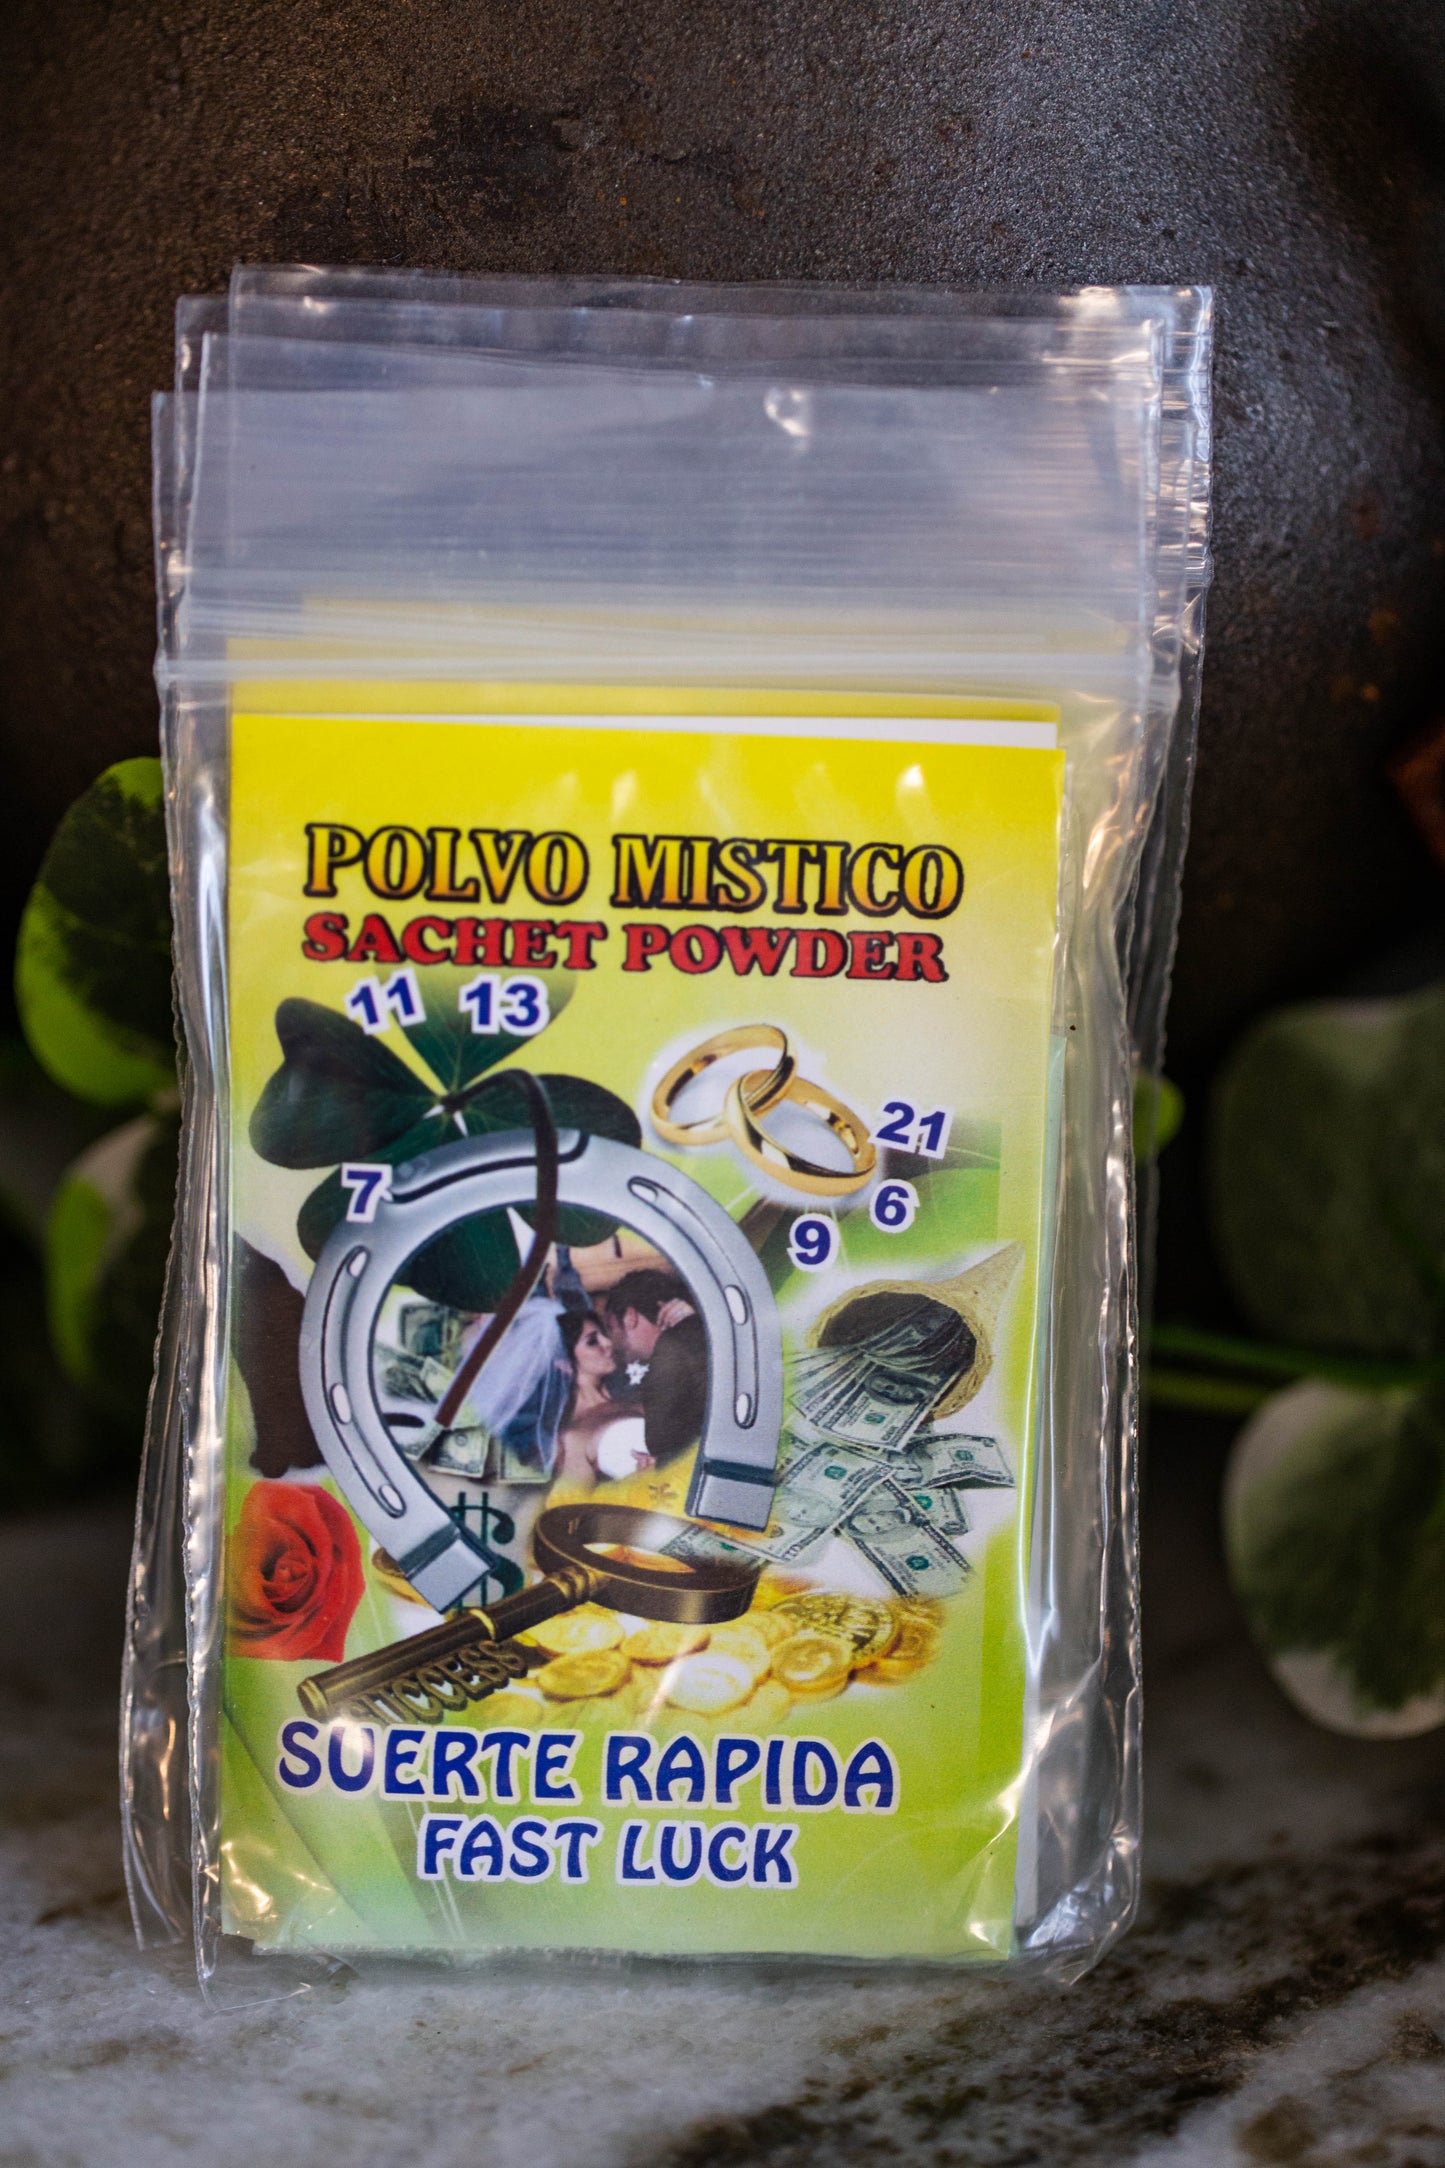 Polvo Mistico - FAST LUCK - Sachet Powder for drawing good luck, fast luck, gambling, court cases